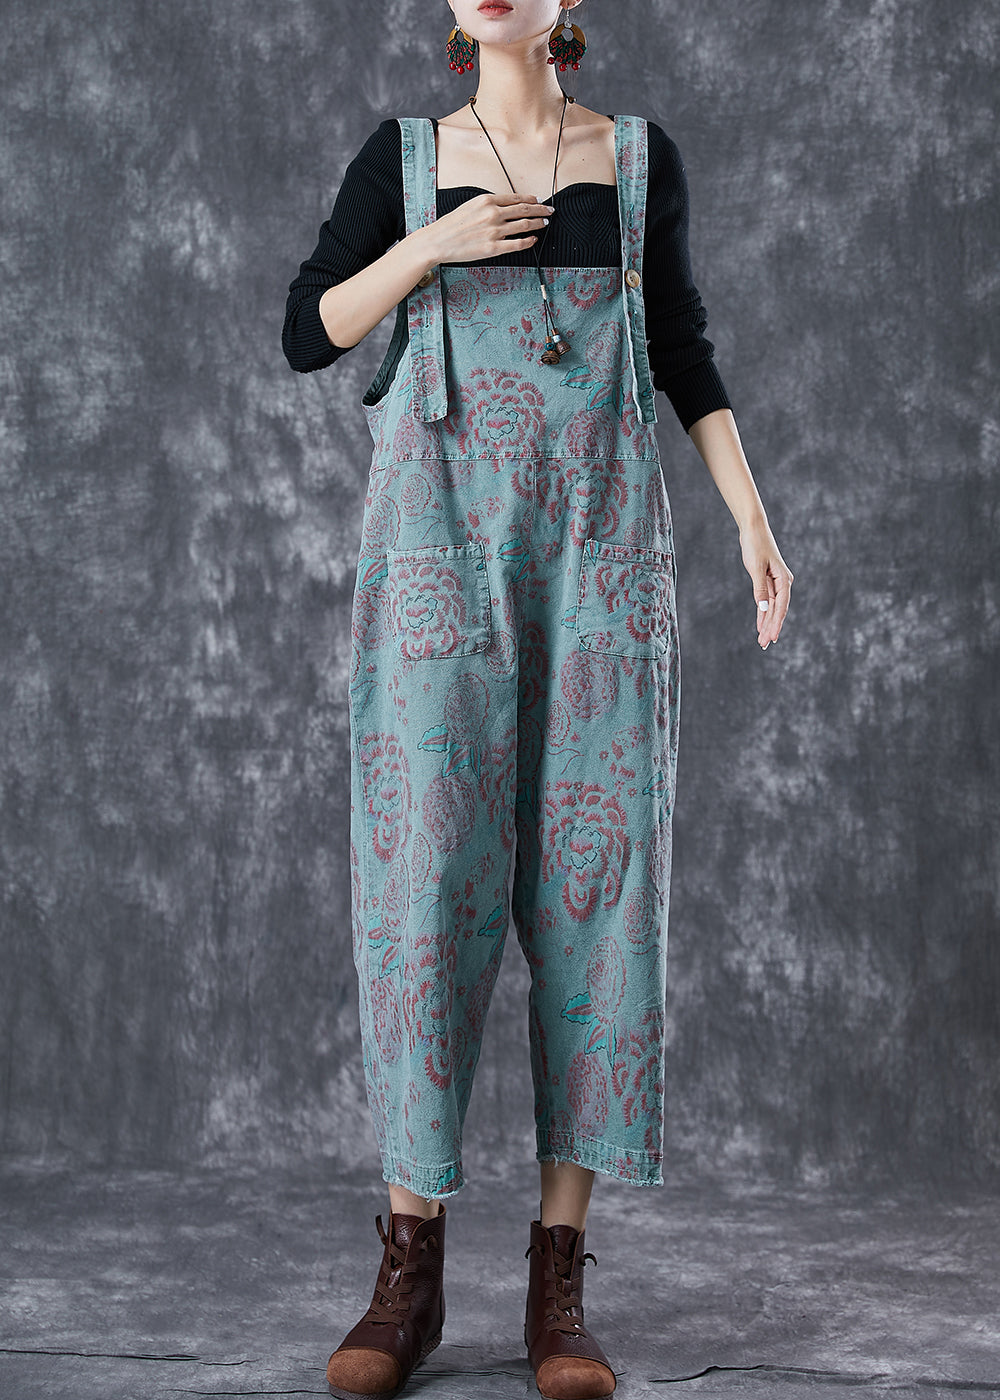 Casual Blue Oversized Print Denim Jumpsuits Summer LY6761